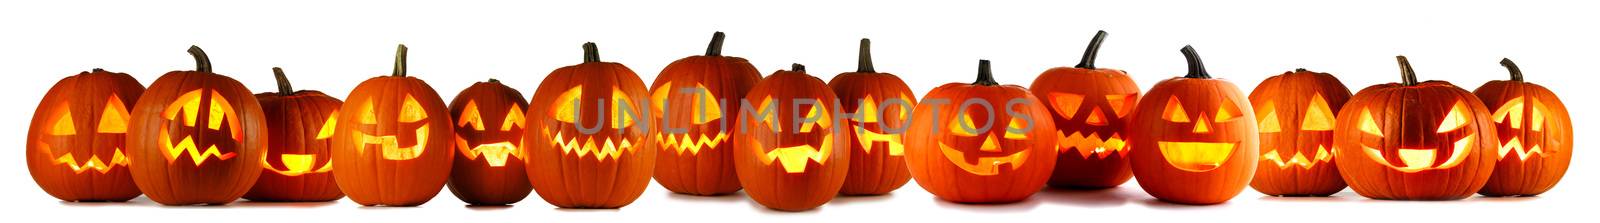 Many Halloween Pumpkins in a row isolated on white background